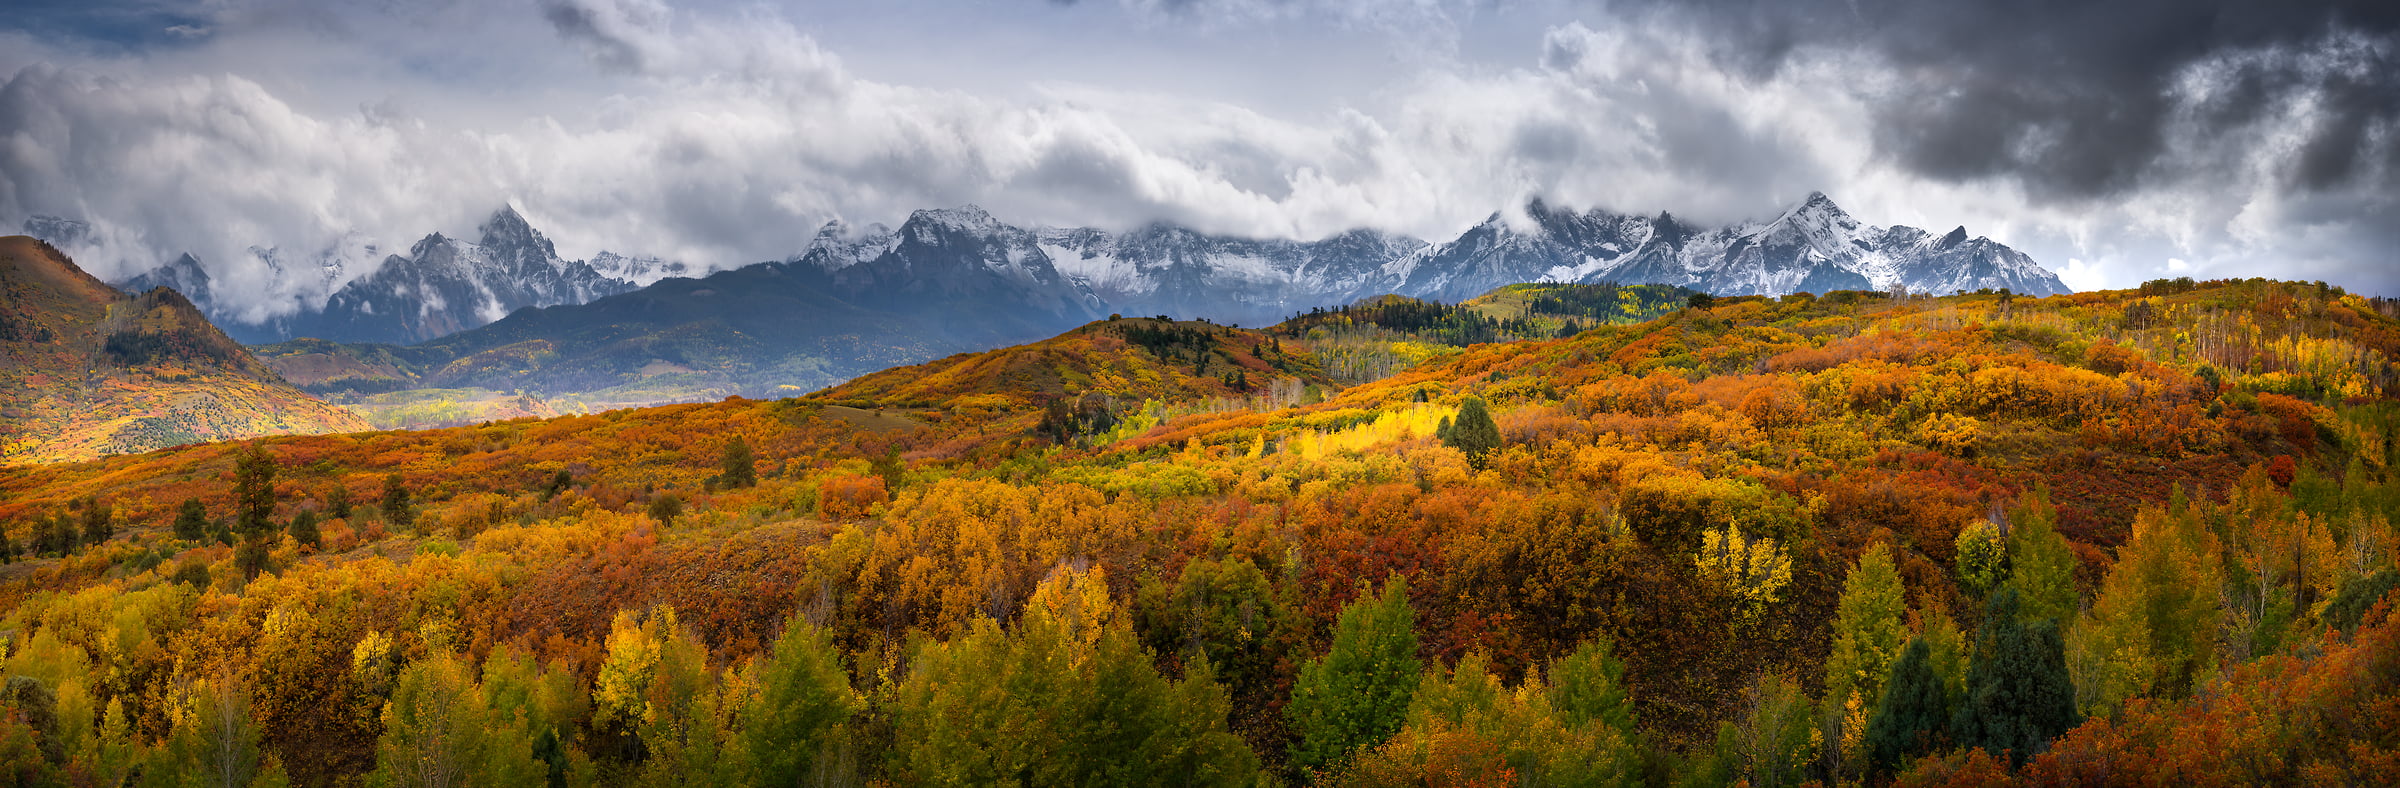 778 megapixels! A very high resolution, large-format VAST photo print of an autumn foliage landscape; photograph created by Jeff Lewis in Ridgway, Colorado.